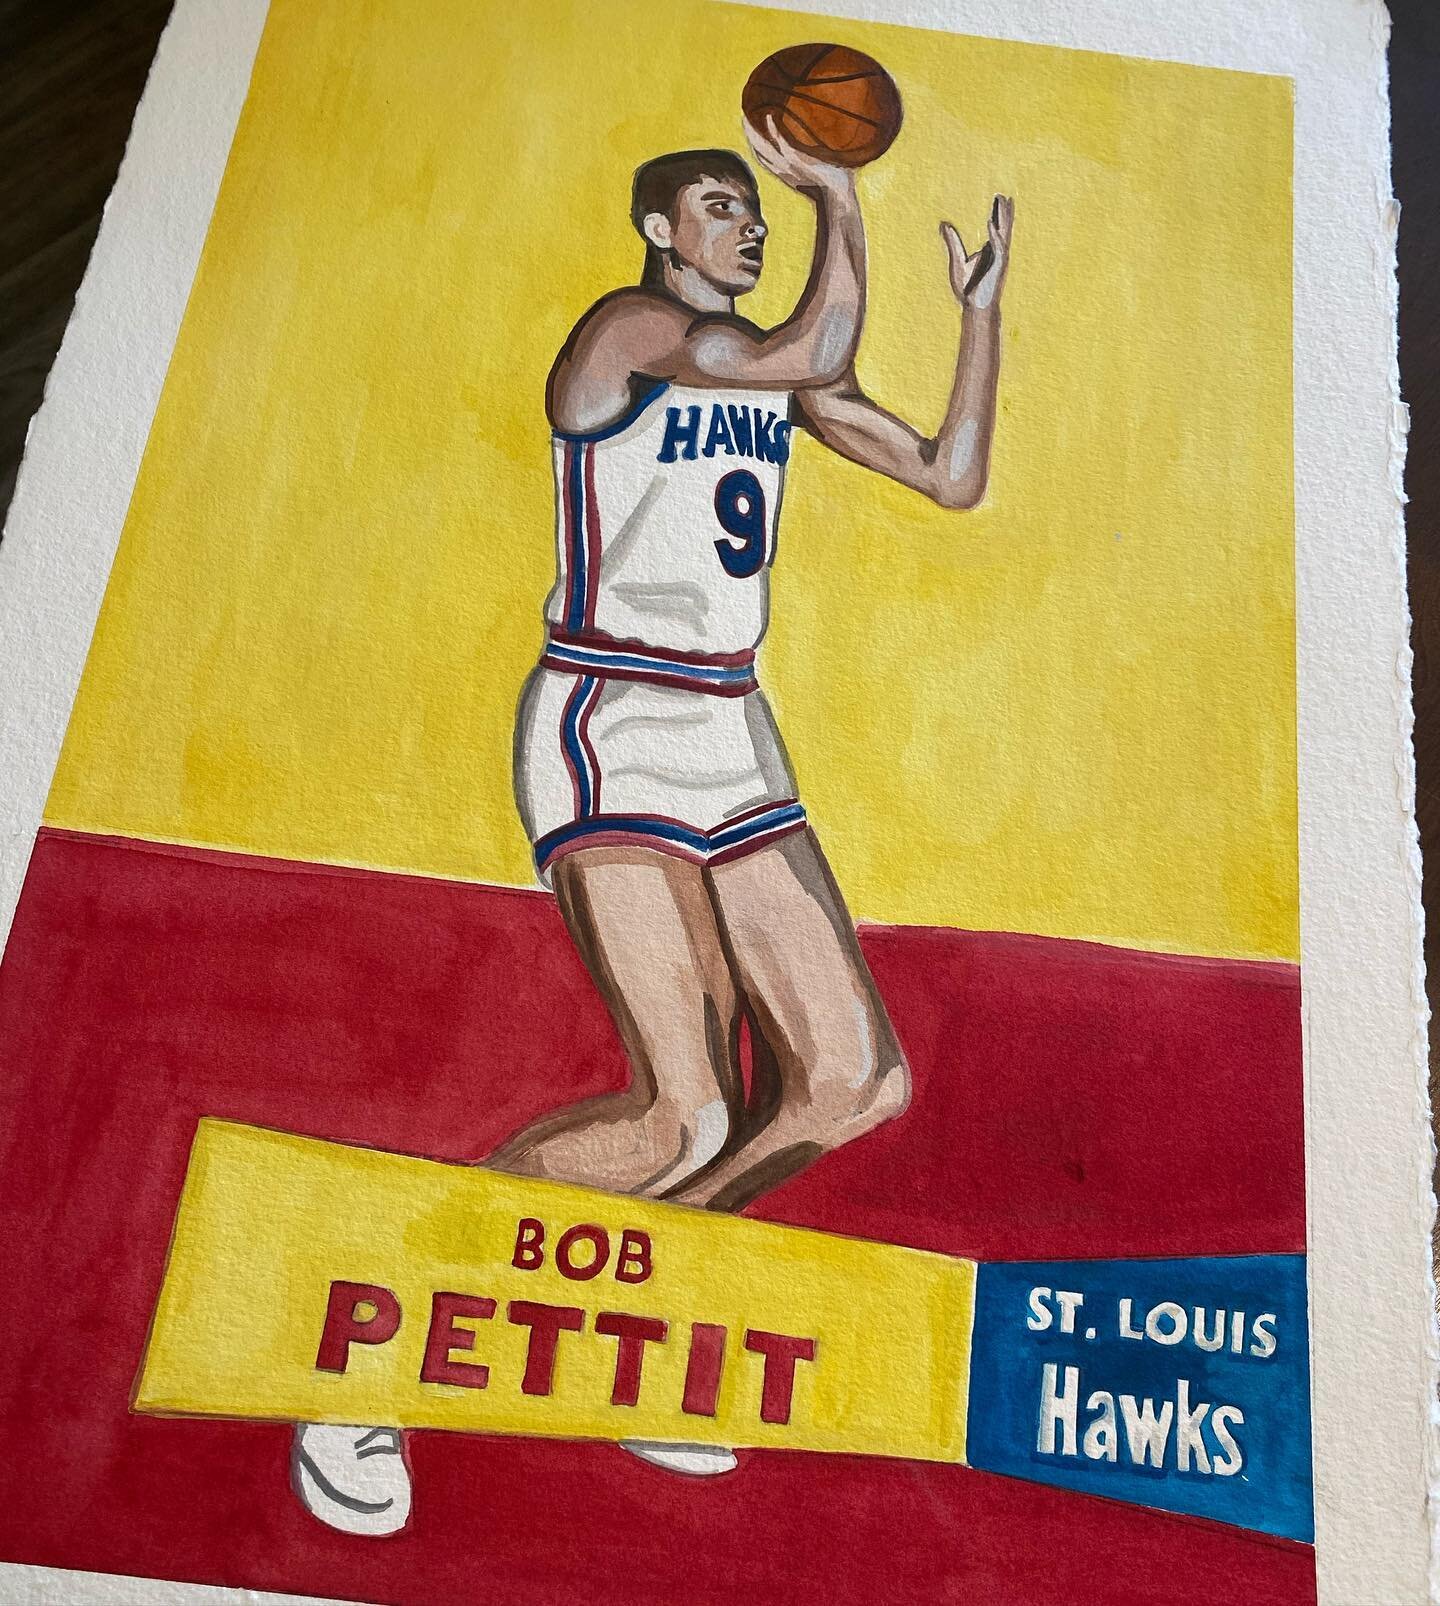 #bobpetit is a classic basketball card with all of the bold colors and smooth lines. I really enjoyed painting this one. #basketball #basketballcards #sportscards #vintagecards #whenitwasagame